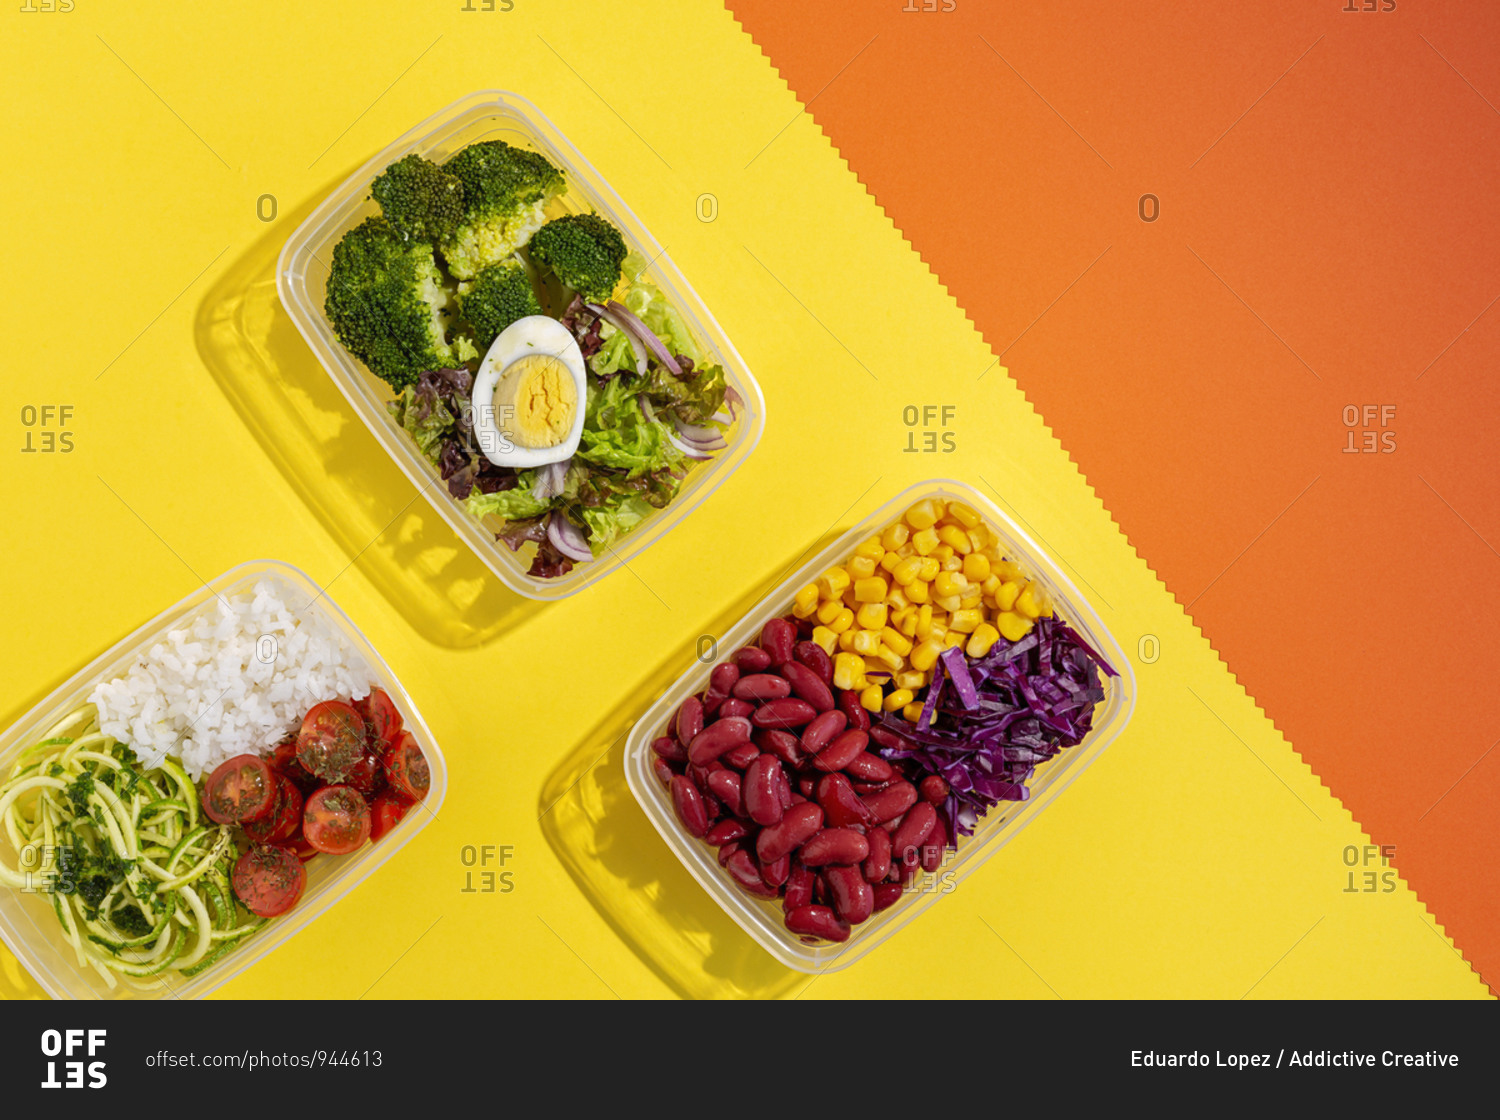 Homemade vegan food in lunch boxes with healthy vegetable
fresh from above. Vegan food concept. Healthy food. Flat lay. Top
view stock photo - OFFSET